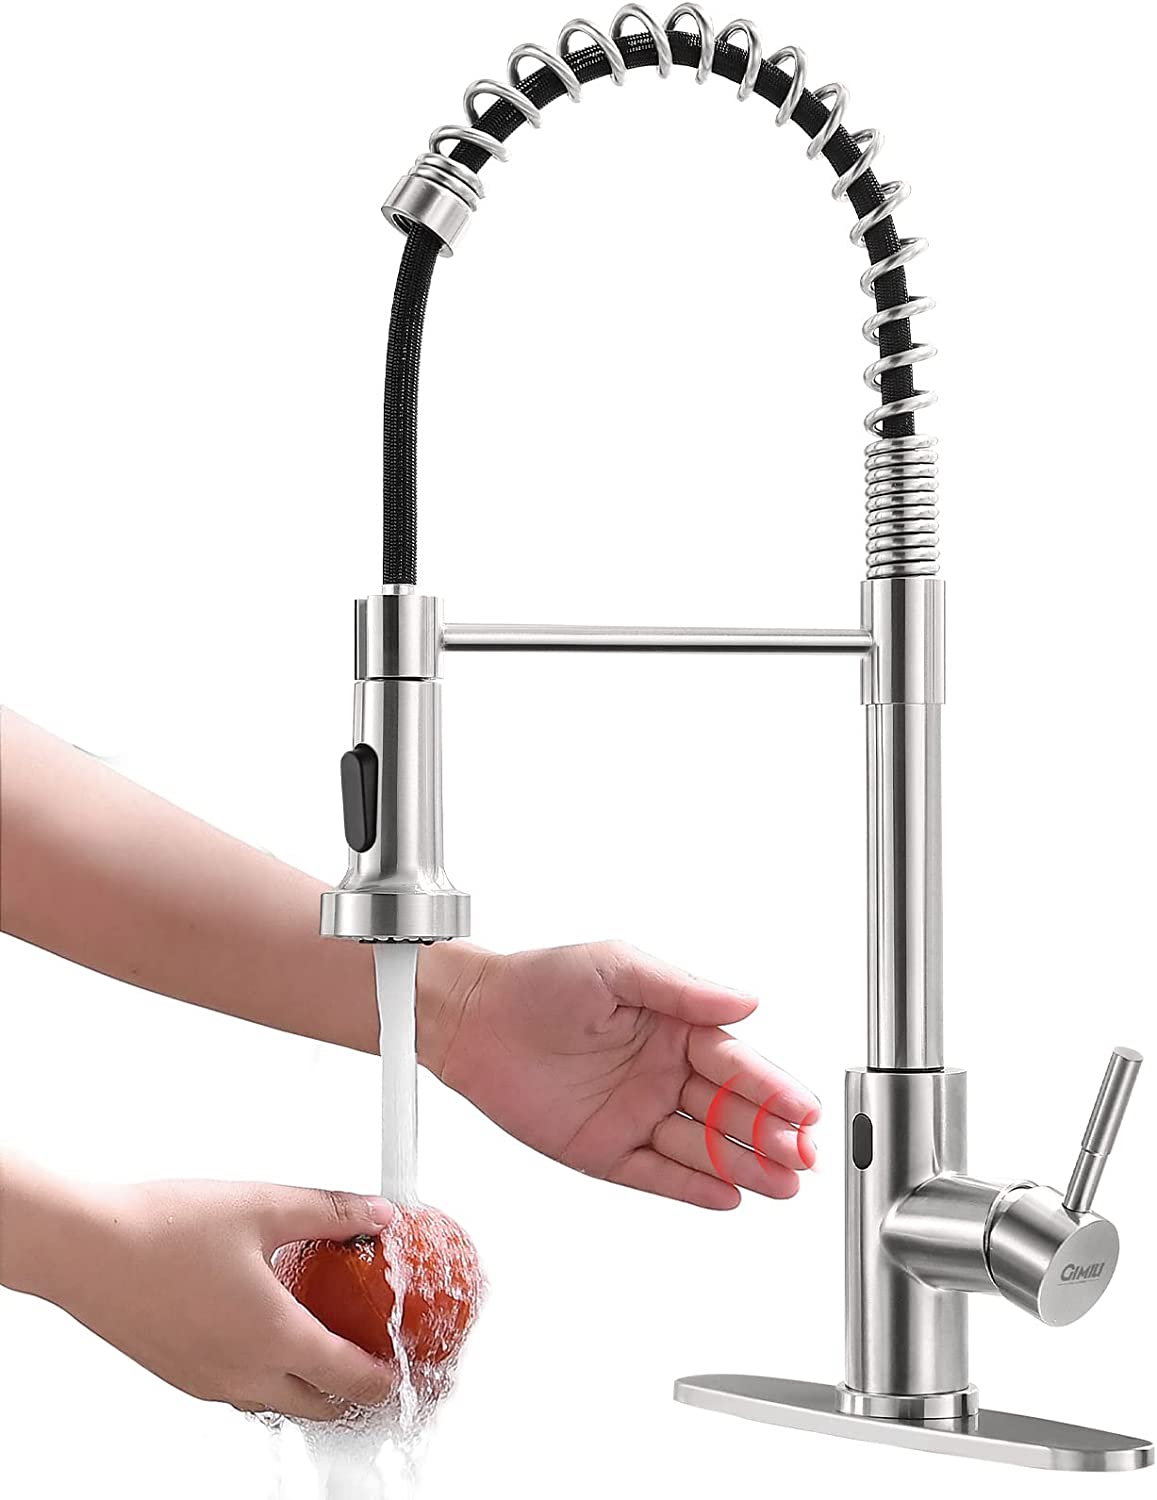 GIMILI Touchless Kitchen Faucet with Pull Down Sprayer [...]